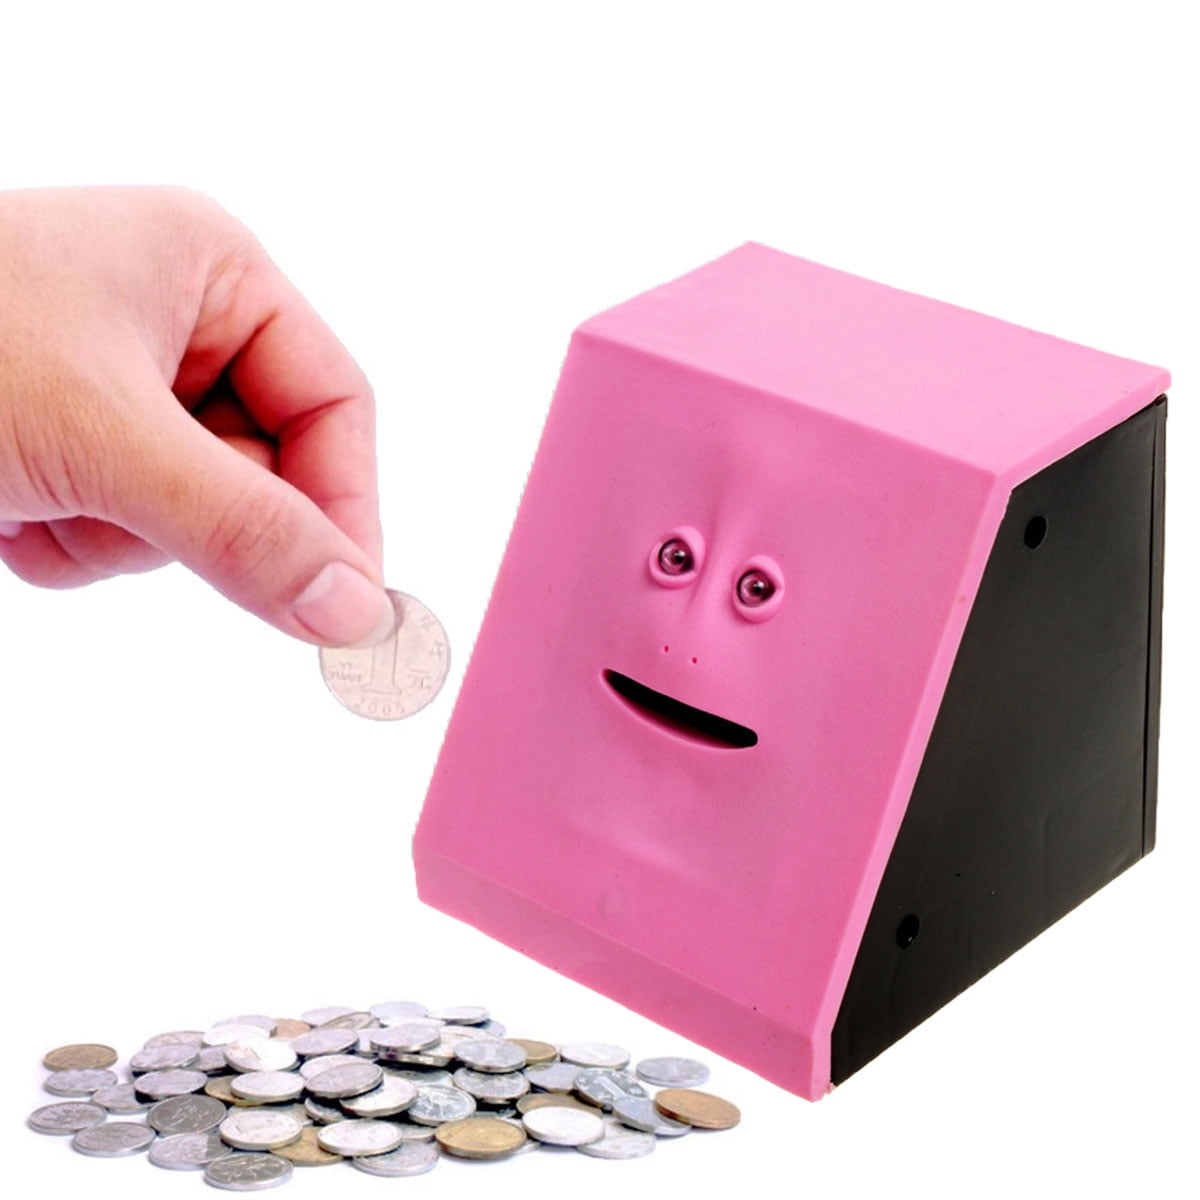 Face Coin Bank Blue Money Eating Coin Bank Battery Powered Automatic Money Saving Bank Portable Coin Container for Children Kids Toys Home Office Decoration